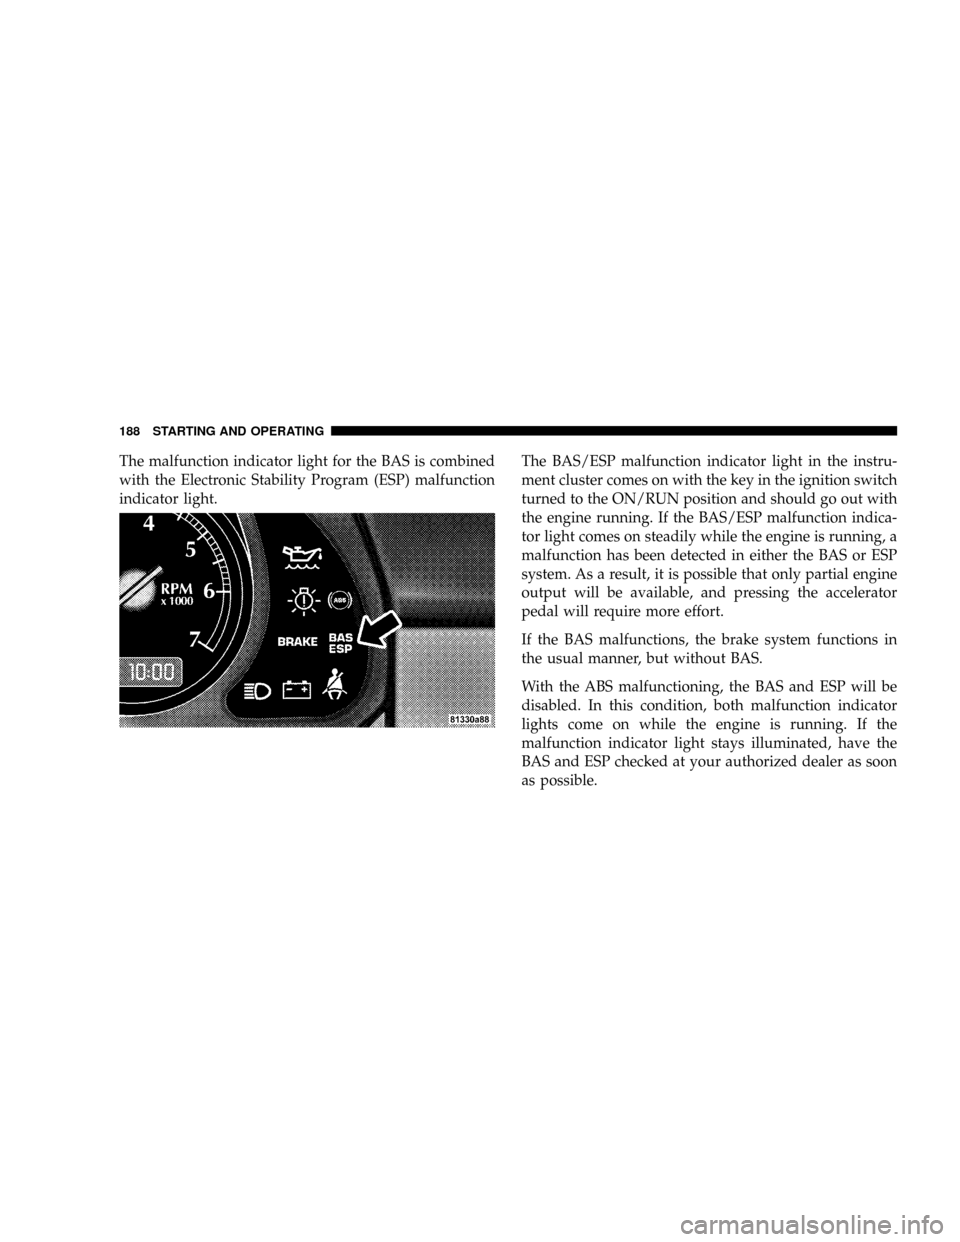 CHRYSLER CROSSFIRE 2008 1.G User Guide The malfunction indicator light for the BAS is combined
with the Electronic Stability Program (ESP) malfunction
indicator light.The BAS/ESP malfunction indicator light in the instru-
ment cluster come